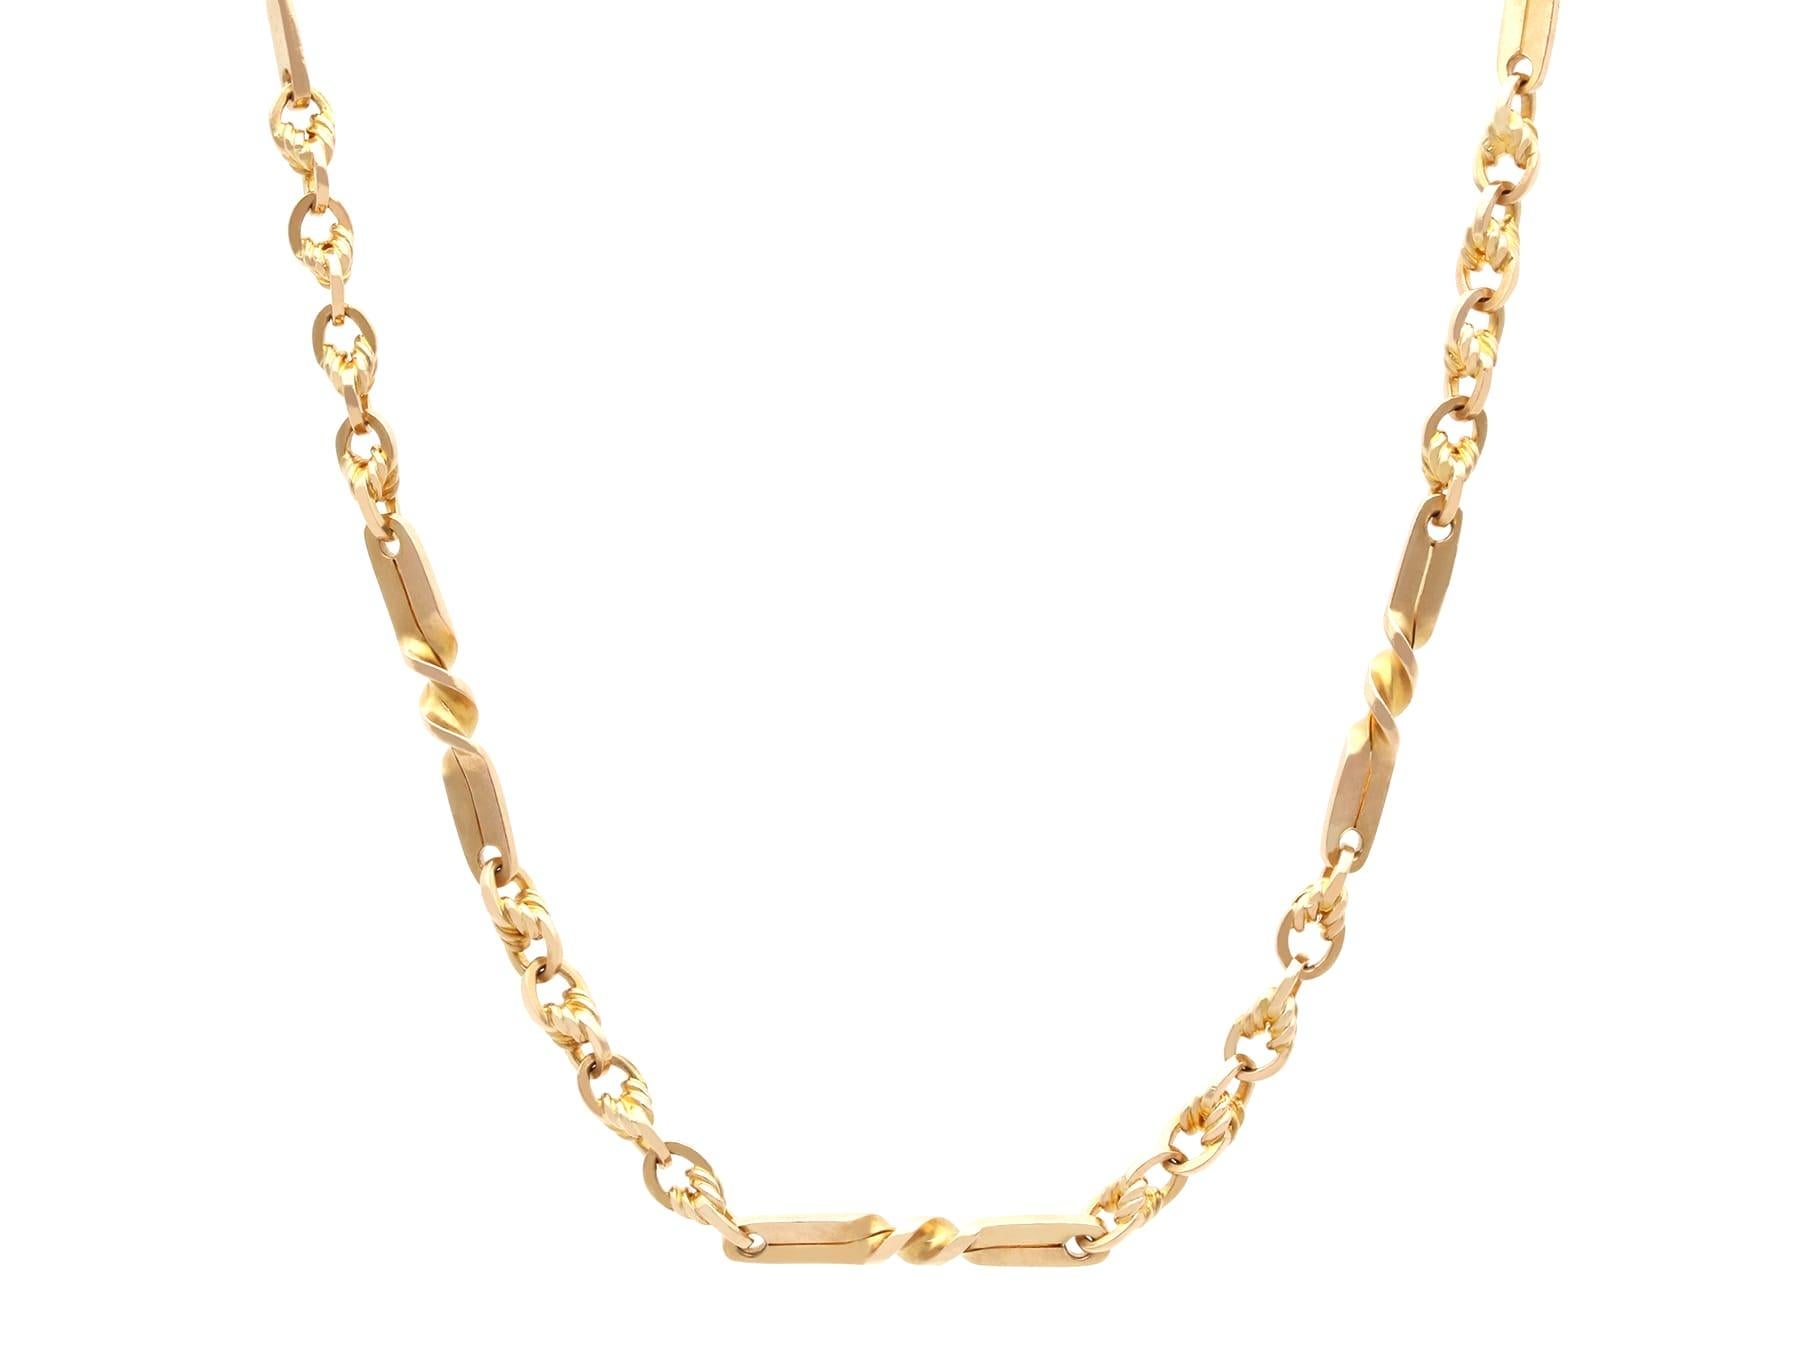 Antique 15k Yellow Gold Longuard Chain Circa 1900 In Excellent Condition For Sale In Jesmond, Newcastle Upon Tyne